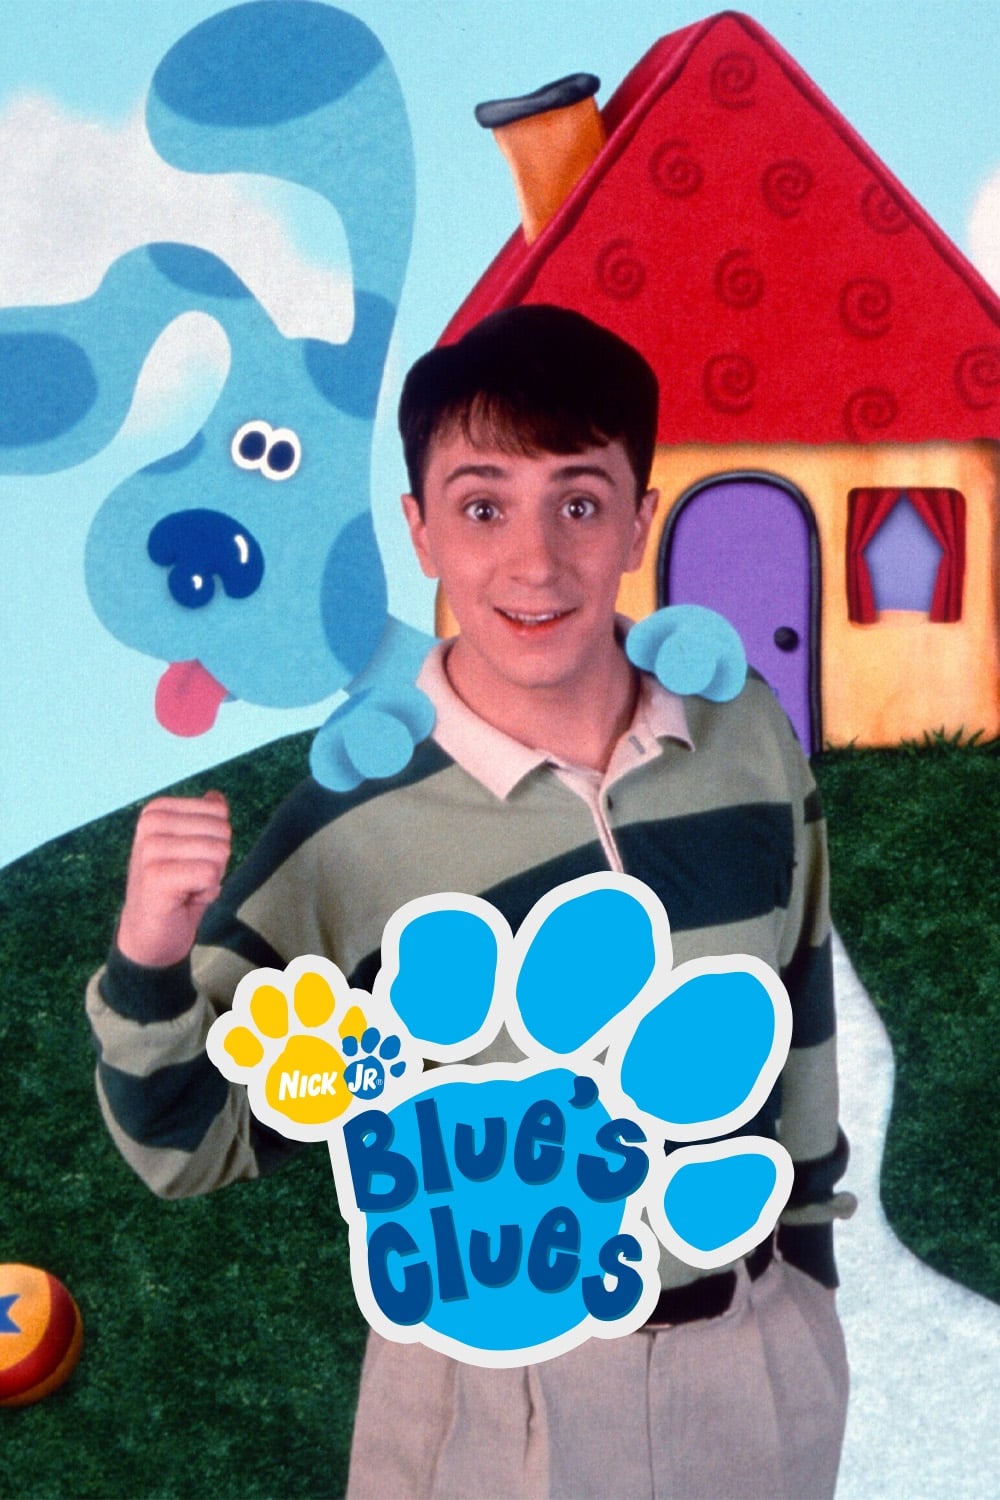 blue-s-clues-tv-series-1996-2006-posters-the-movie-database-tmdb